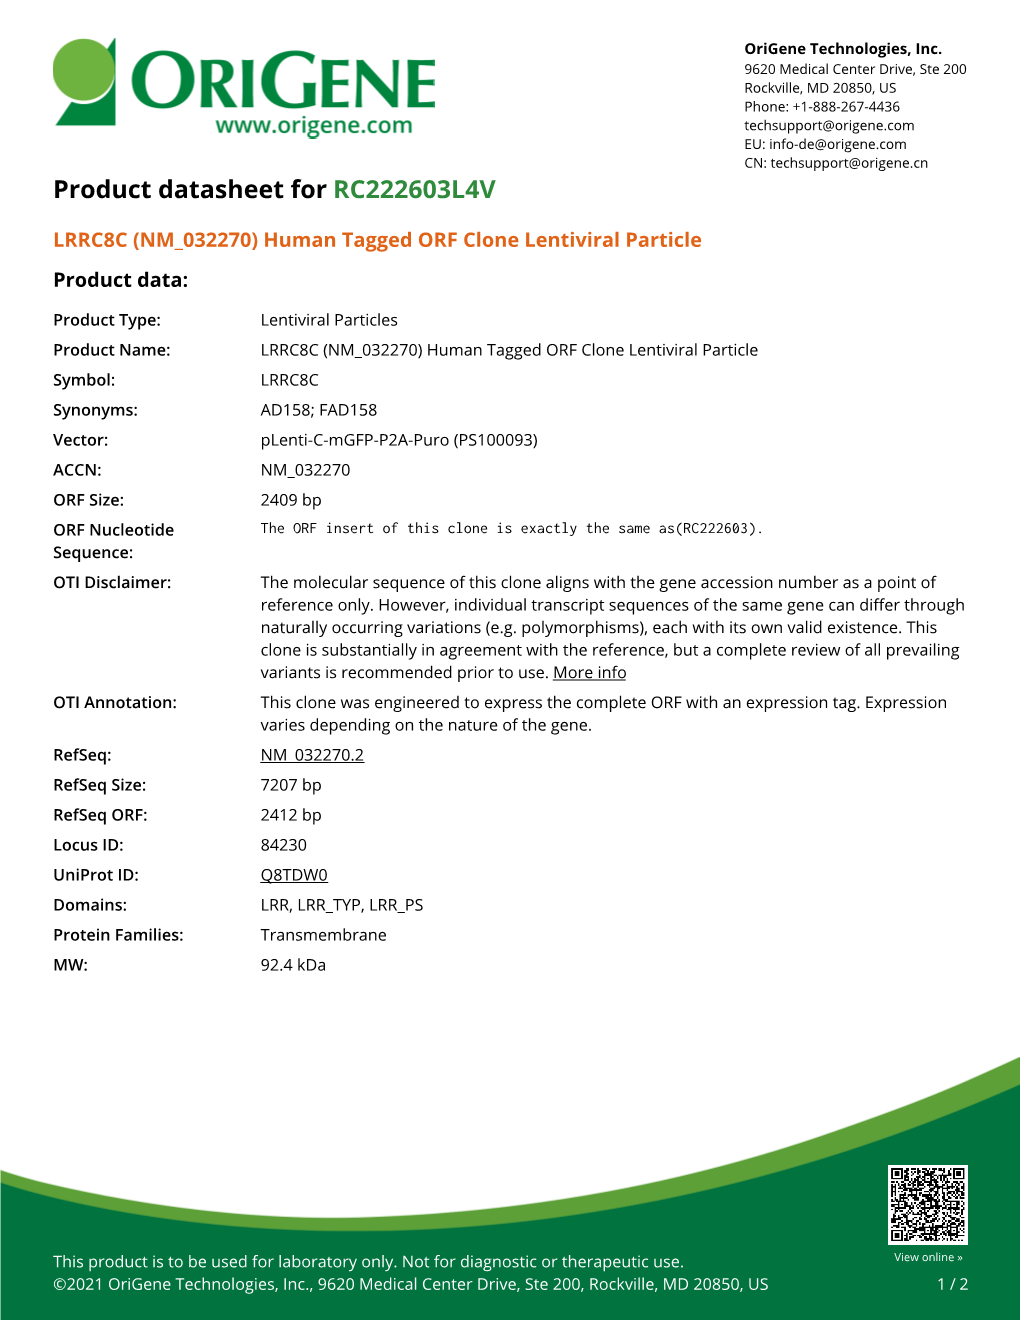 LRRC8C (NM 032270) Human Tagged ORF Clone Lentiviral Particle Product Data